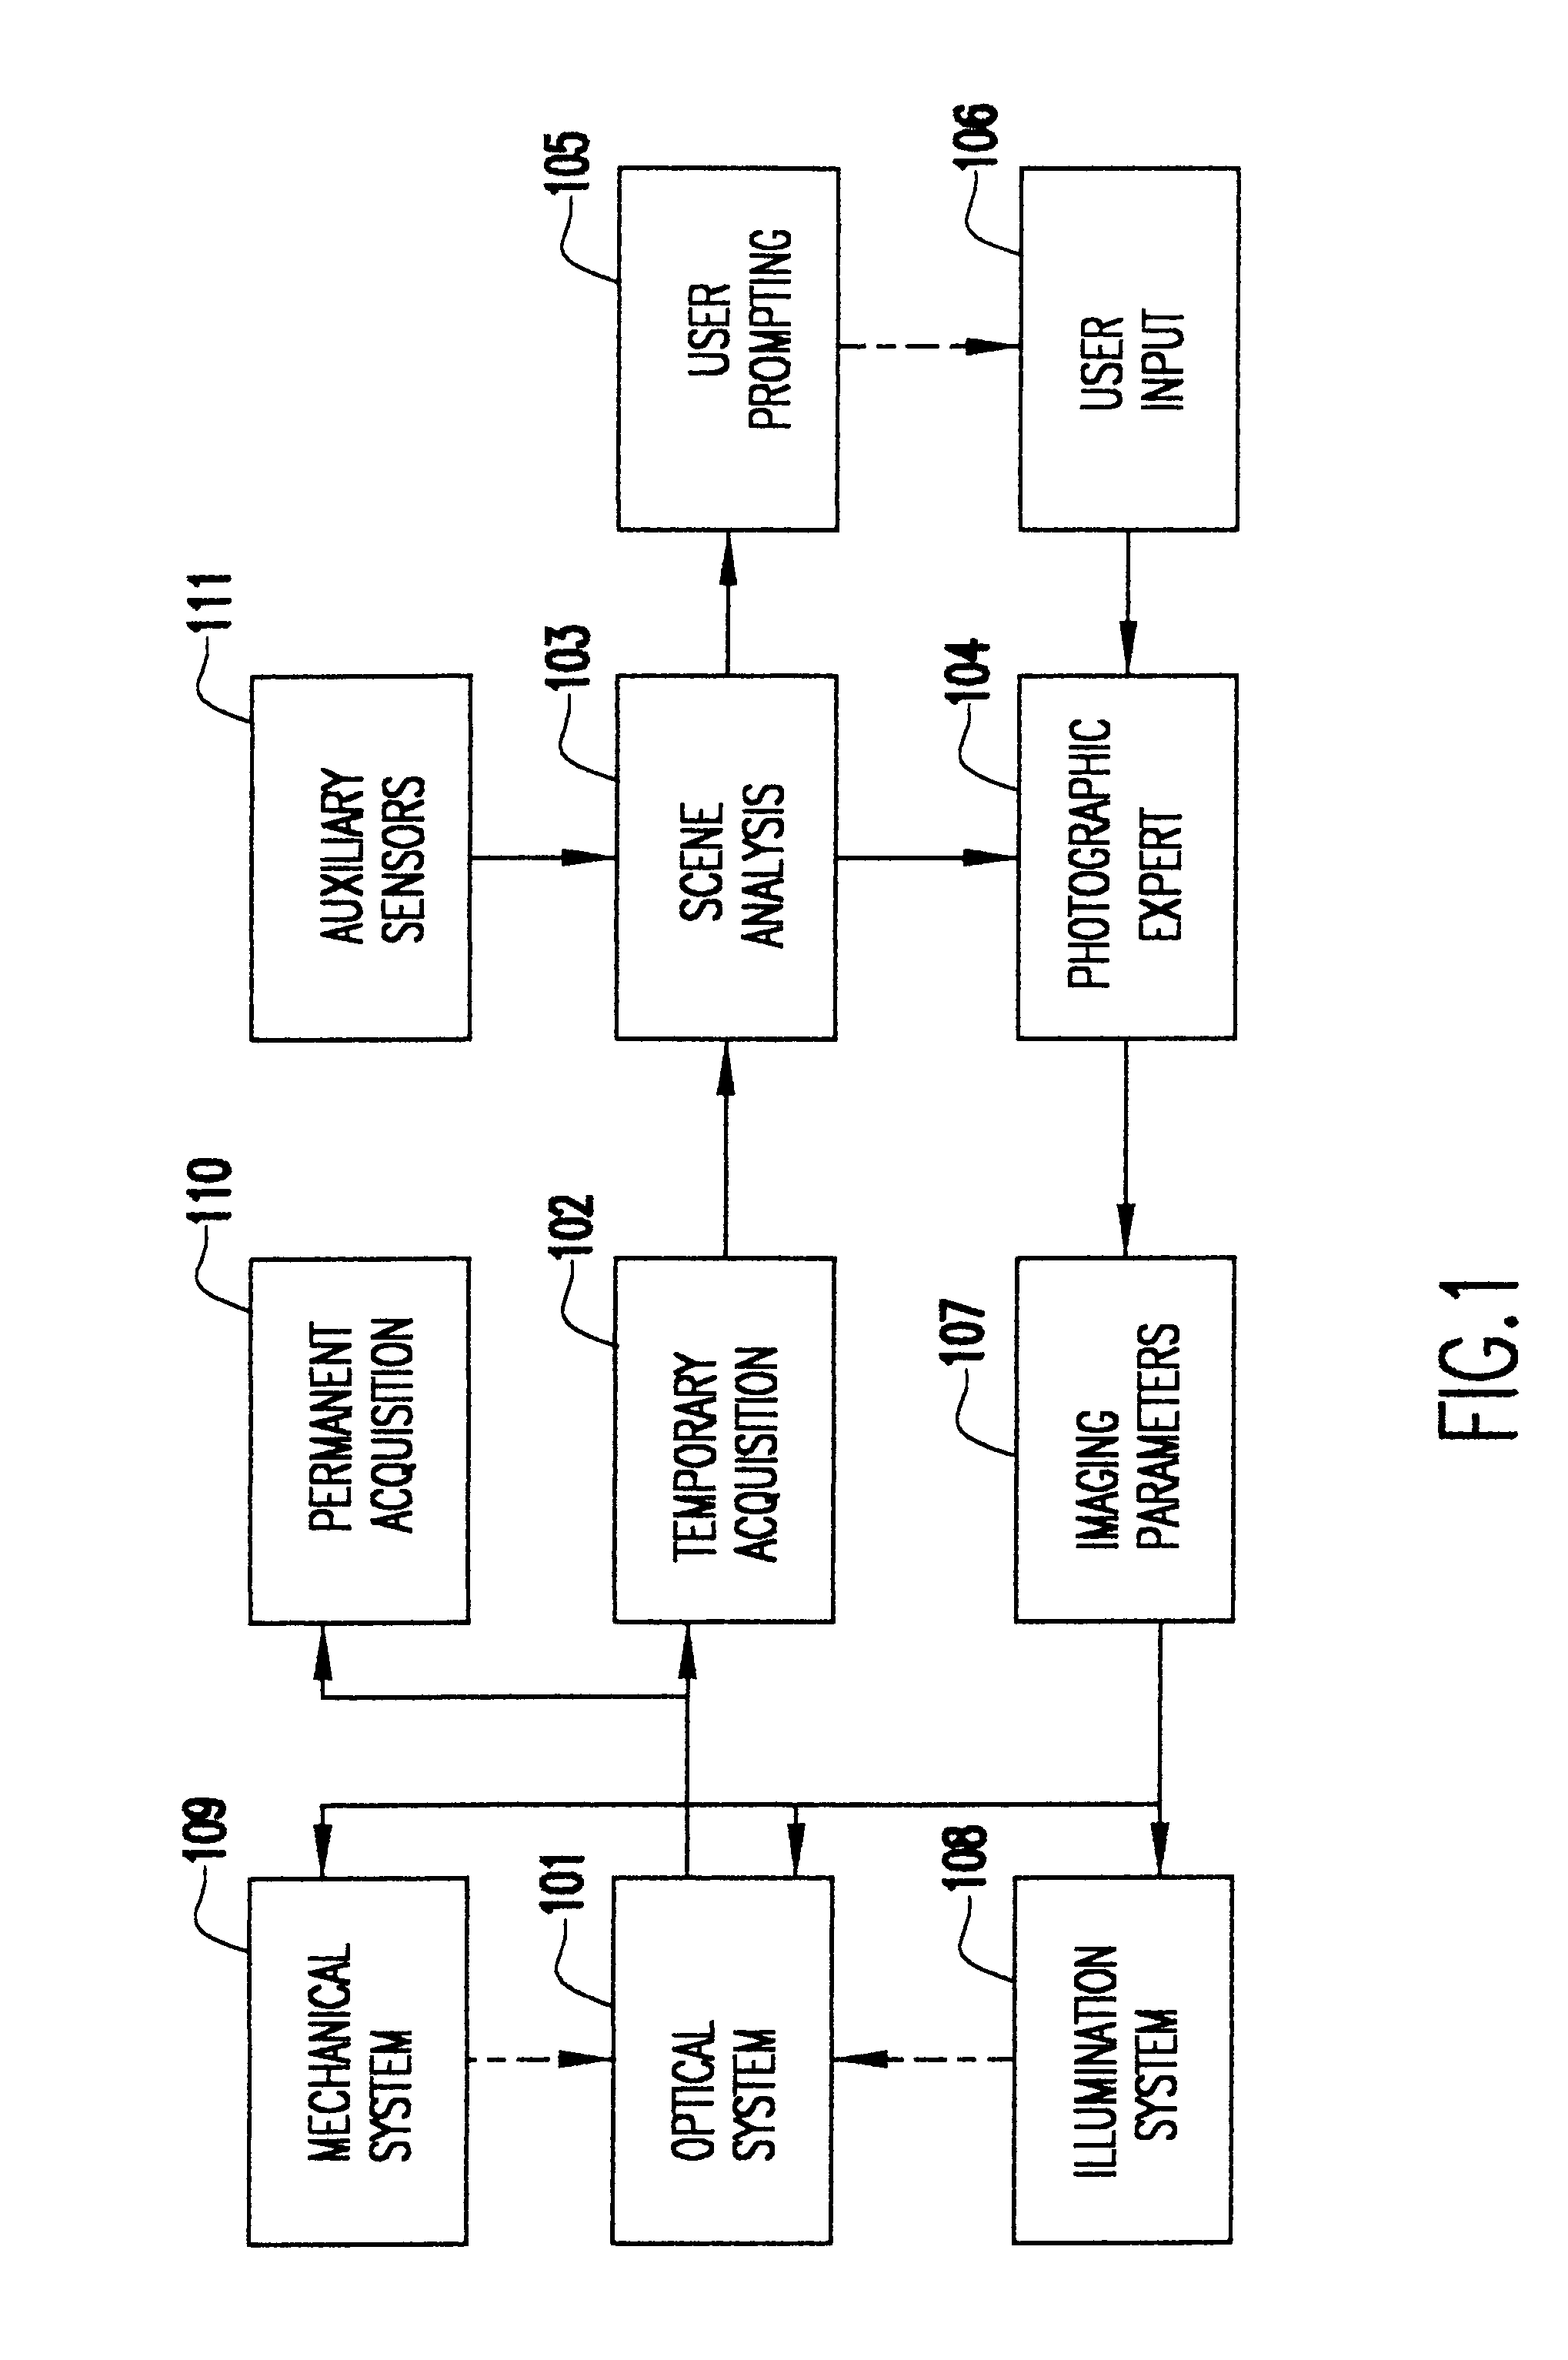 System and method for automatically setting image acquisition controls